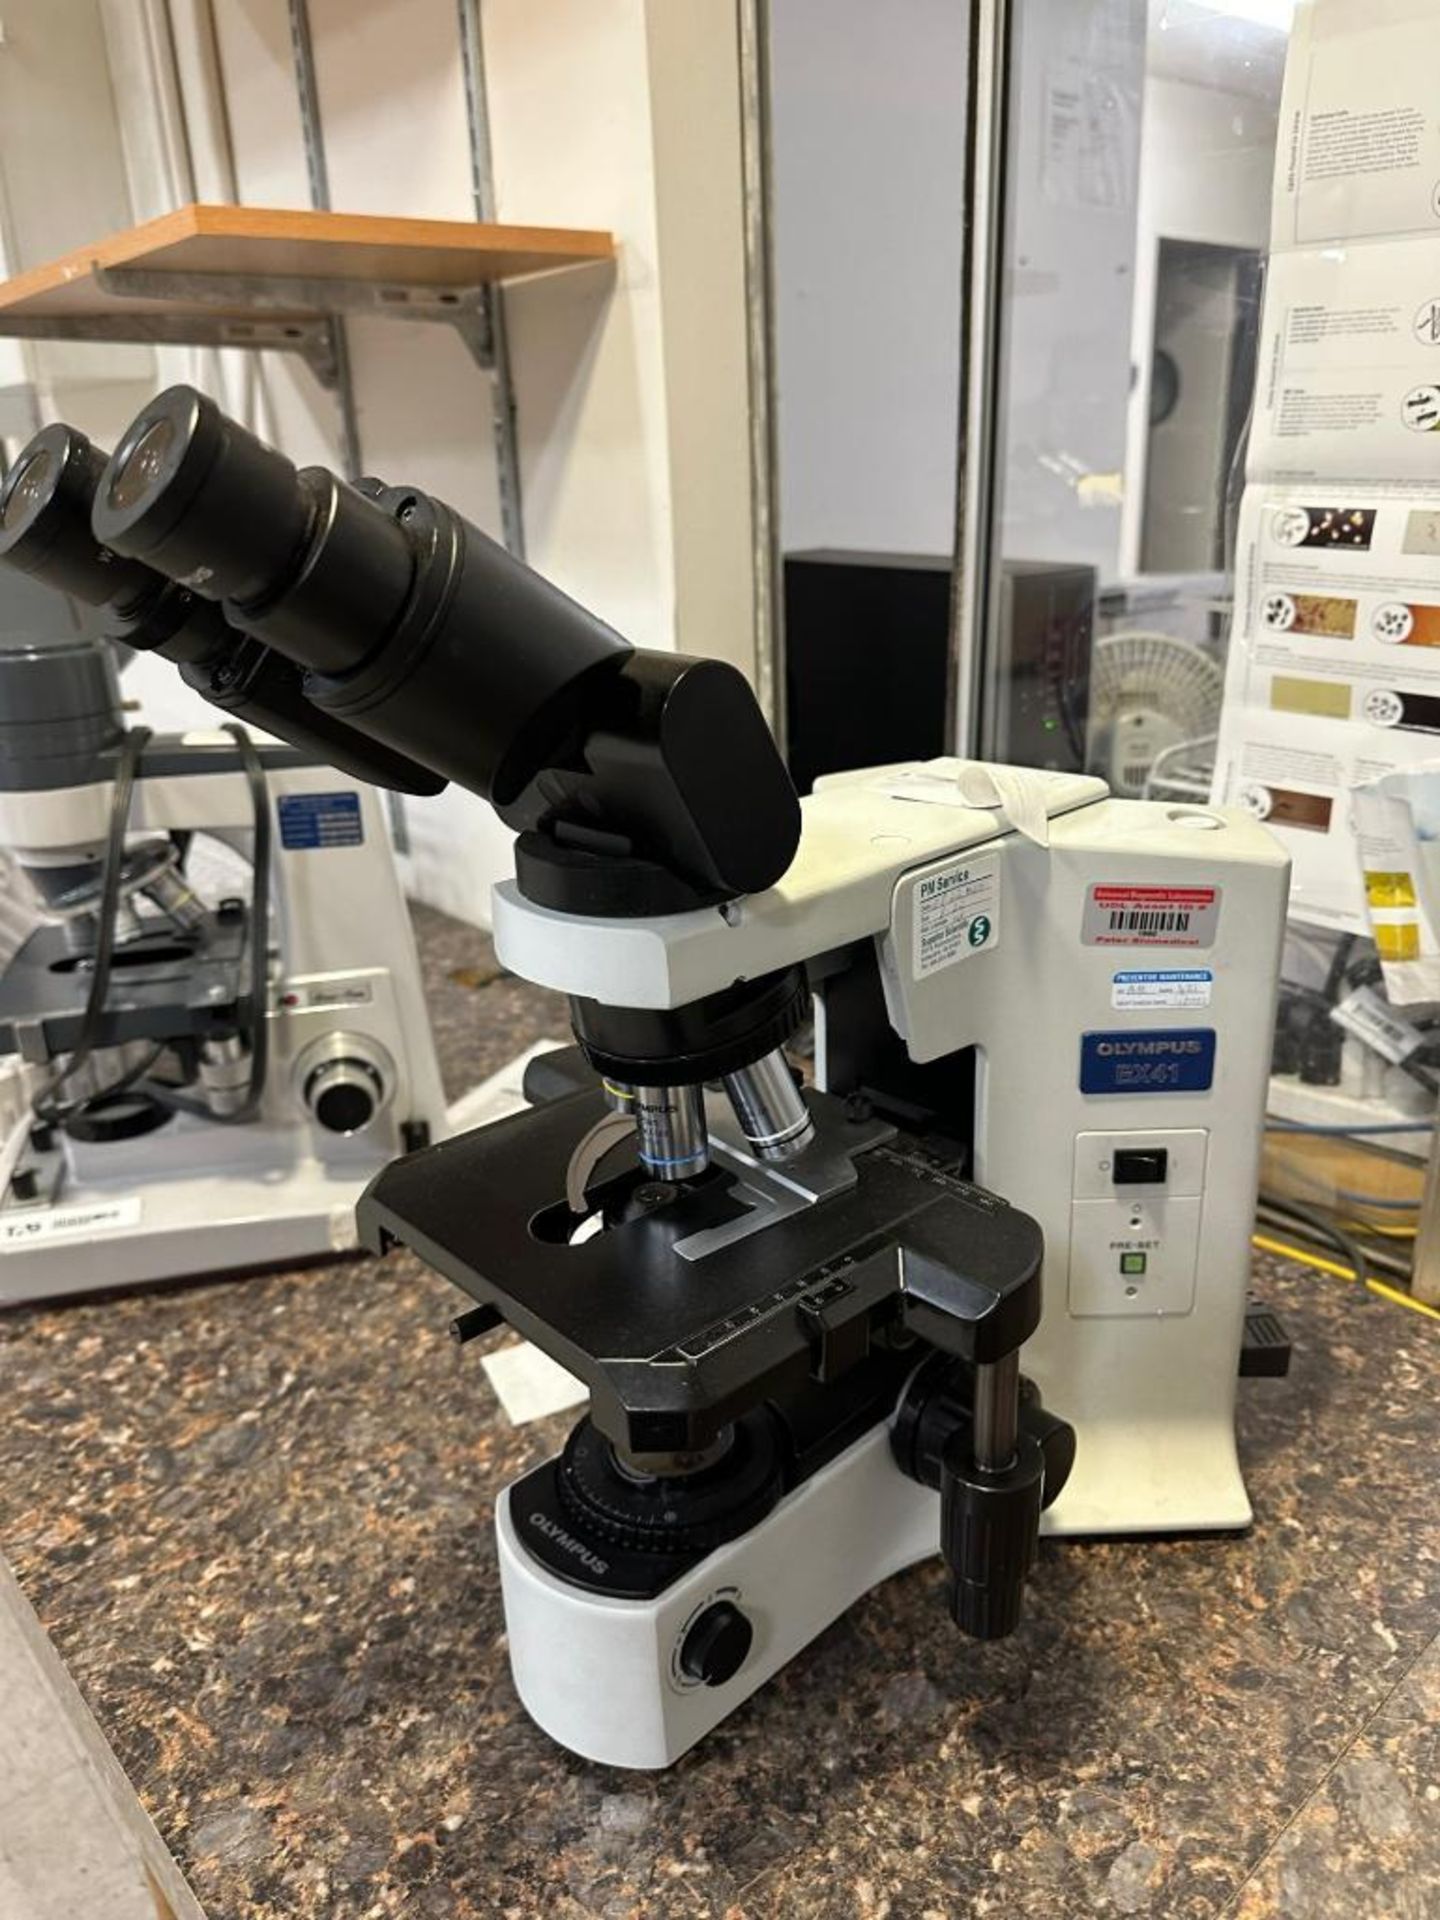 OLYMPUS BX41 LAB MICROSCOPE WITH 4 OBJECTIVES - Image 2 of 4